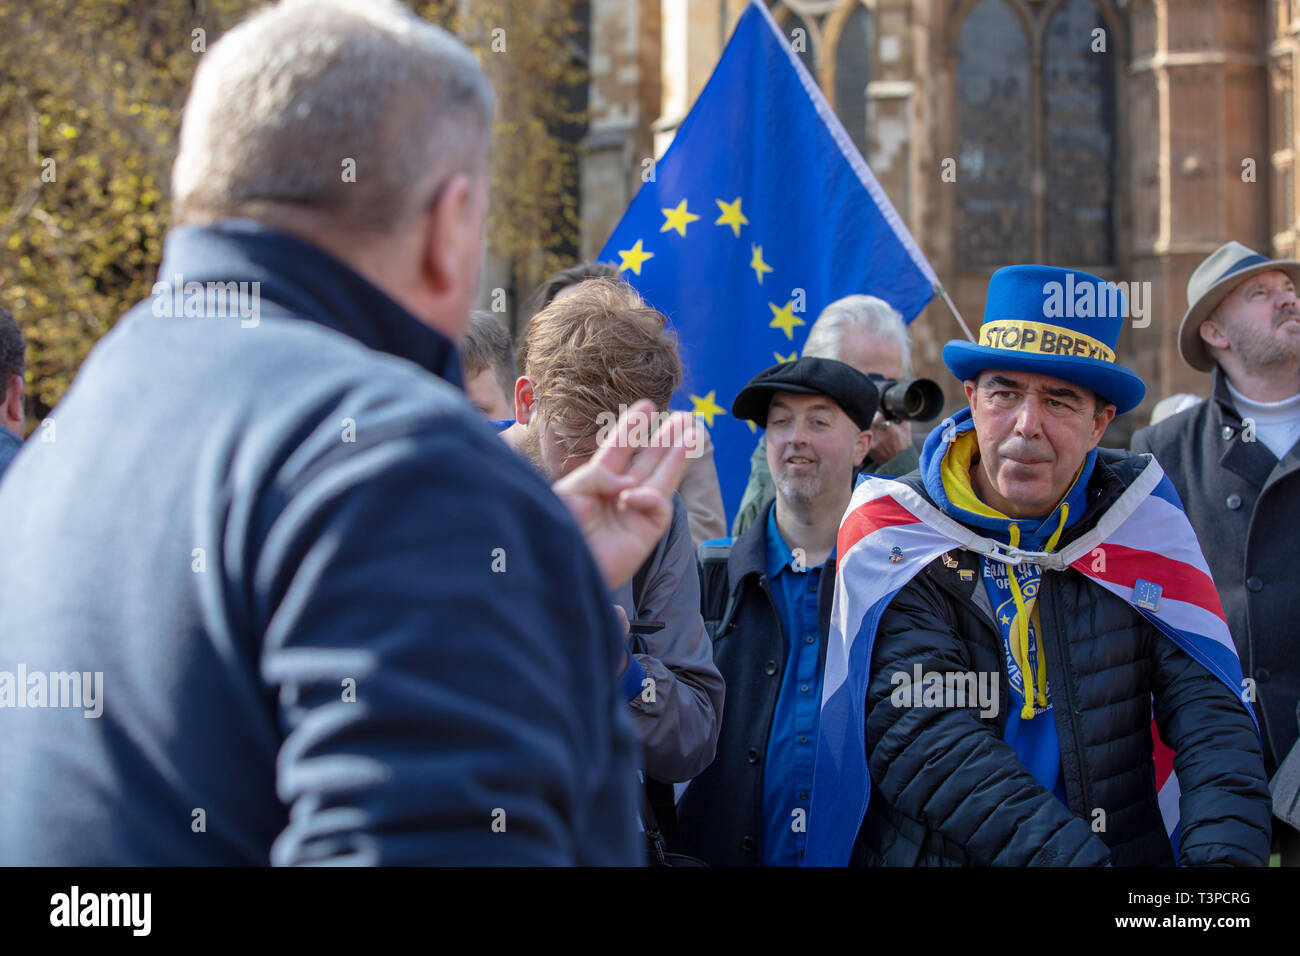 Arch remainer Steve Bray, seen in the blue hat, discussing brexit with a brexiteer. Stock Photo